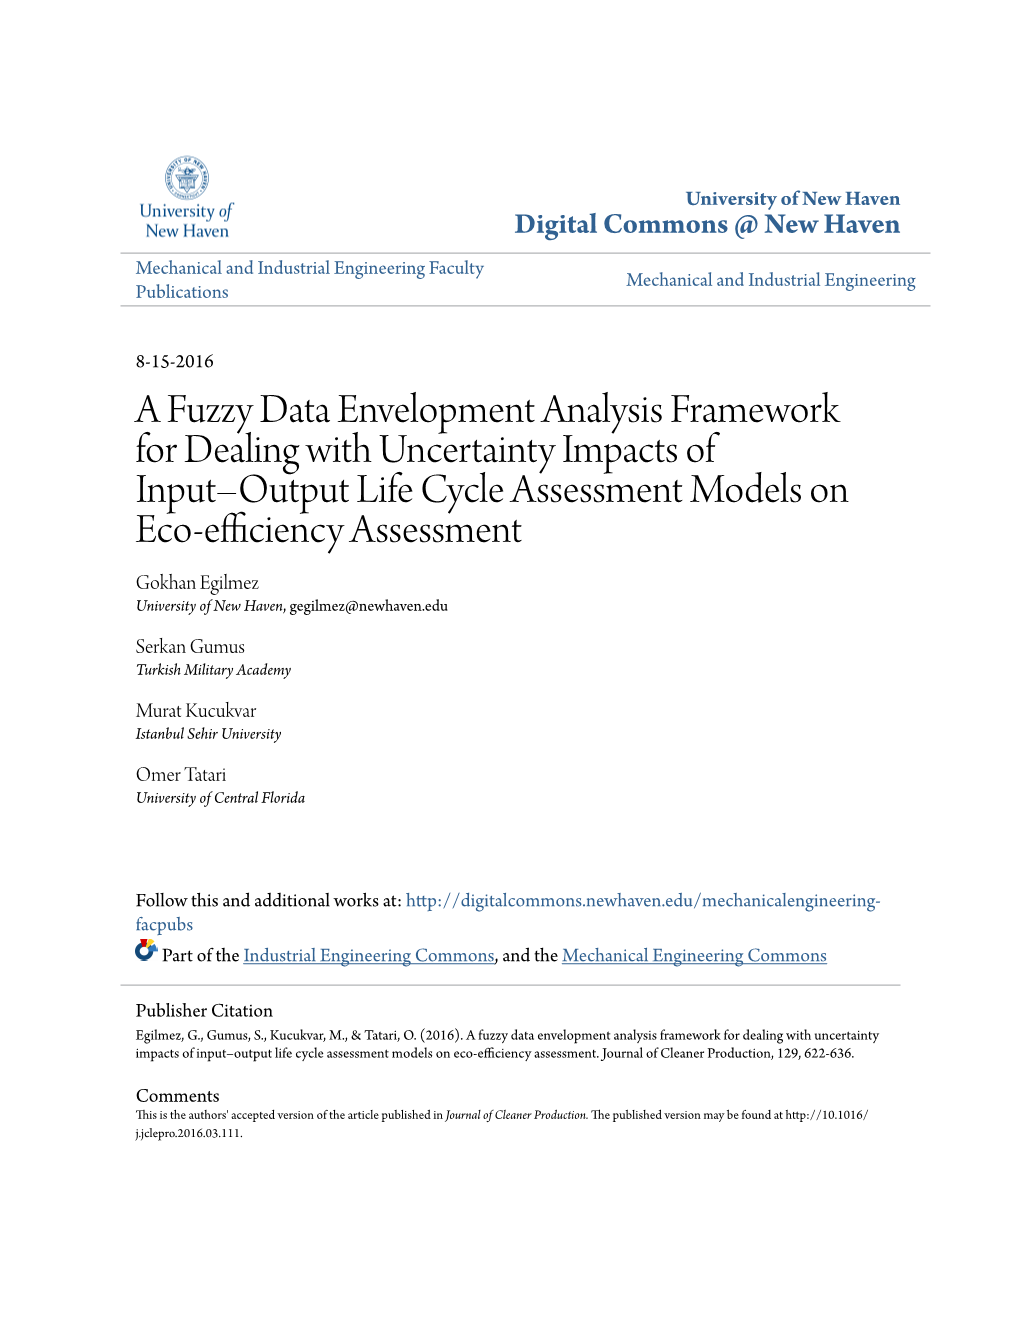 A Fuzzy Data Envelopment Analysis Framework for Dealing with Uncertainty Impacts of Input–Output Life Cycle Assessment Models